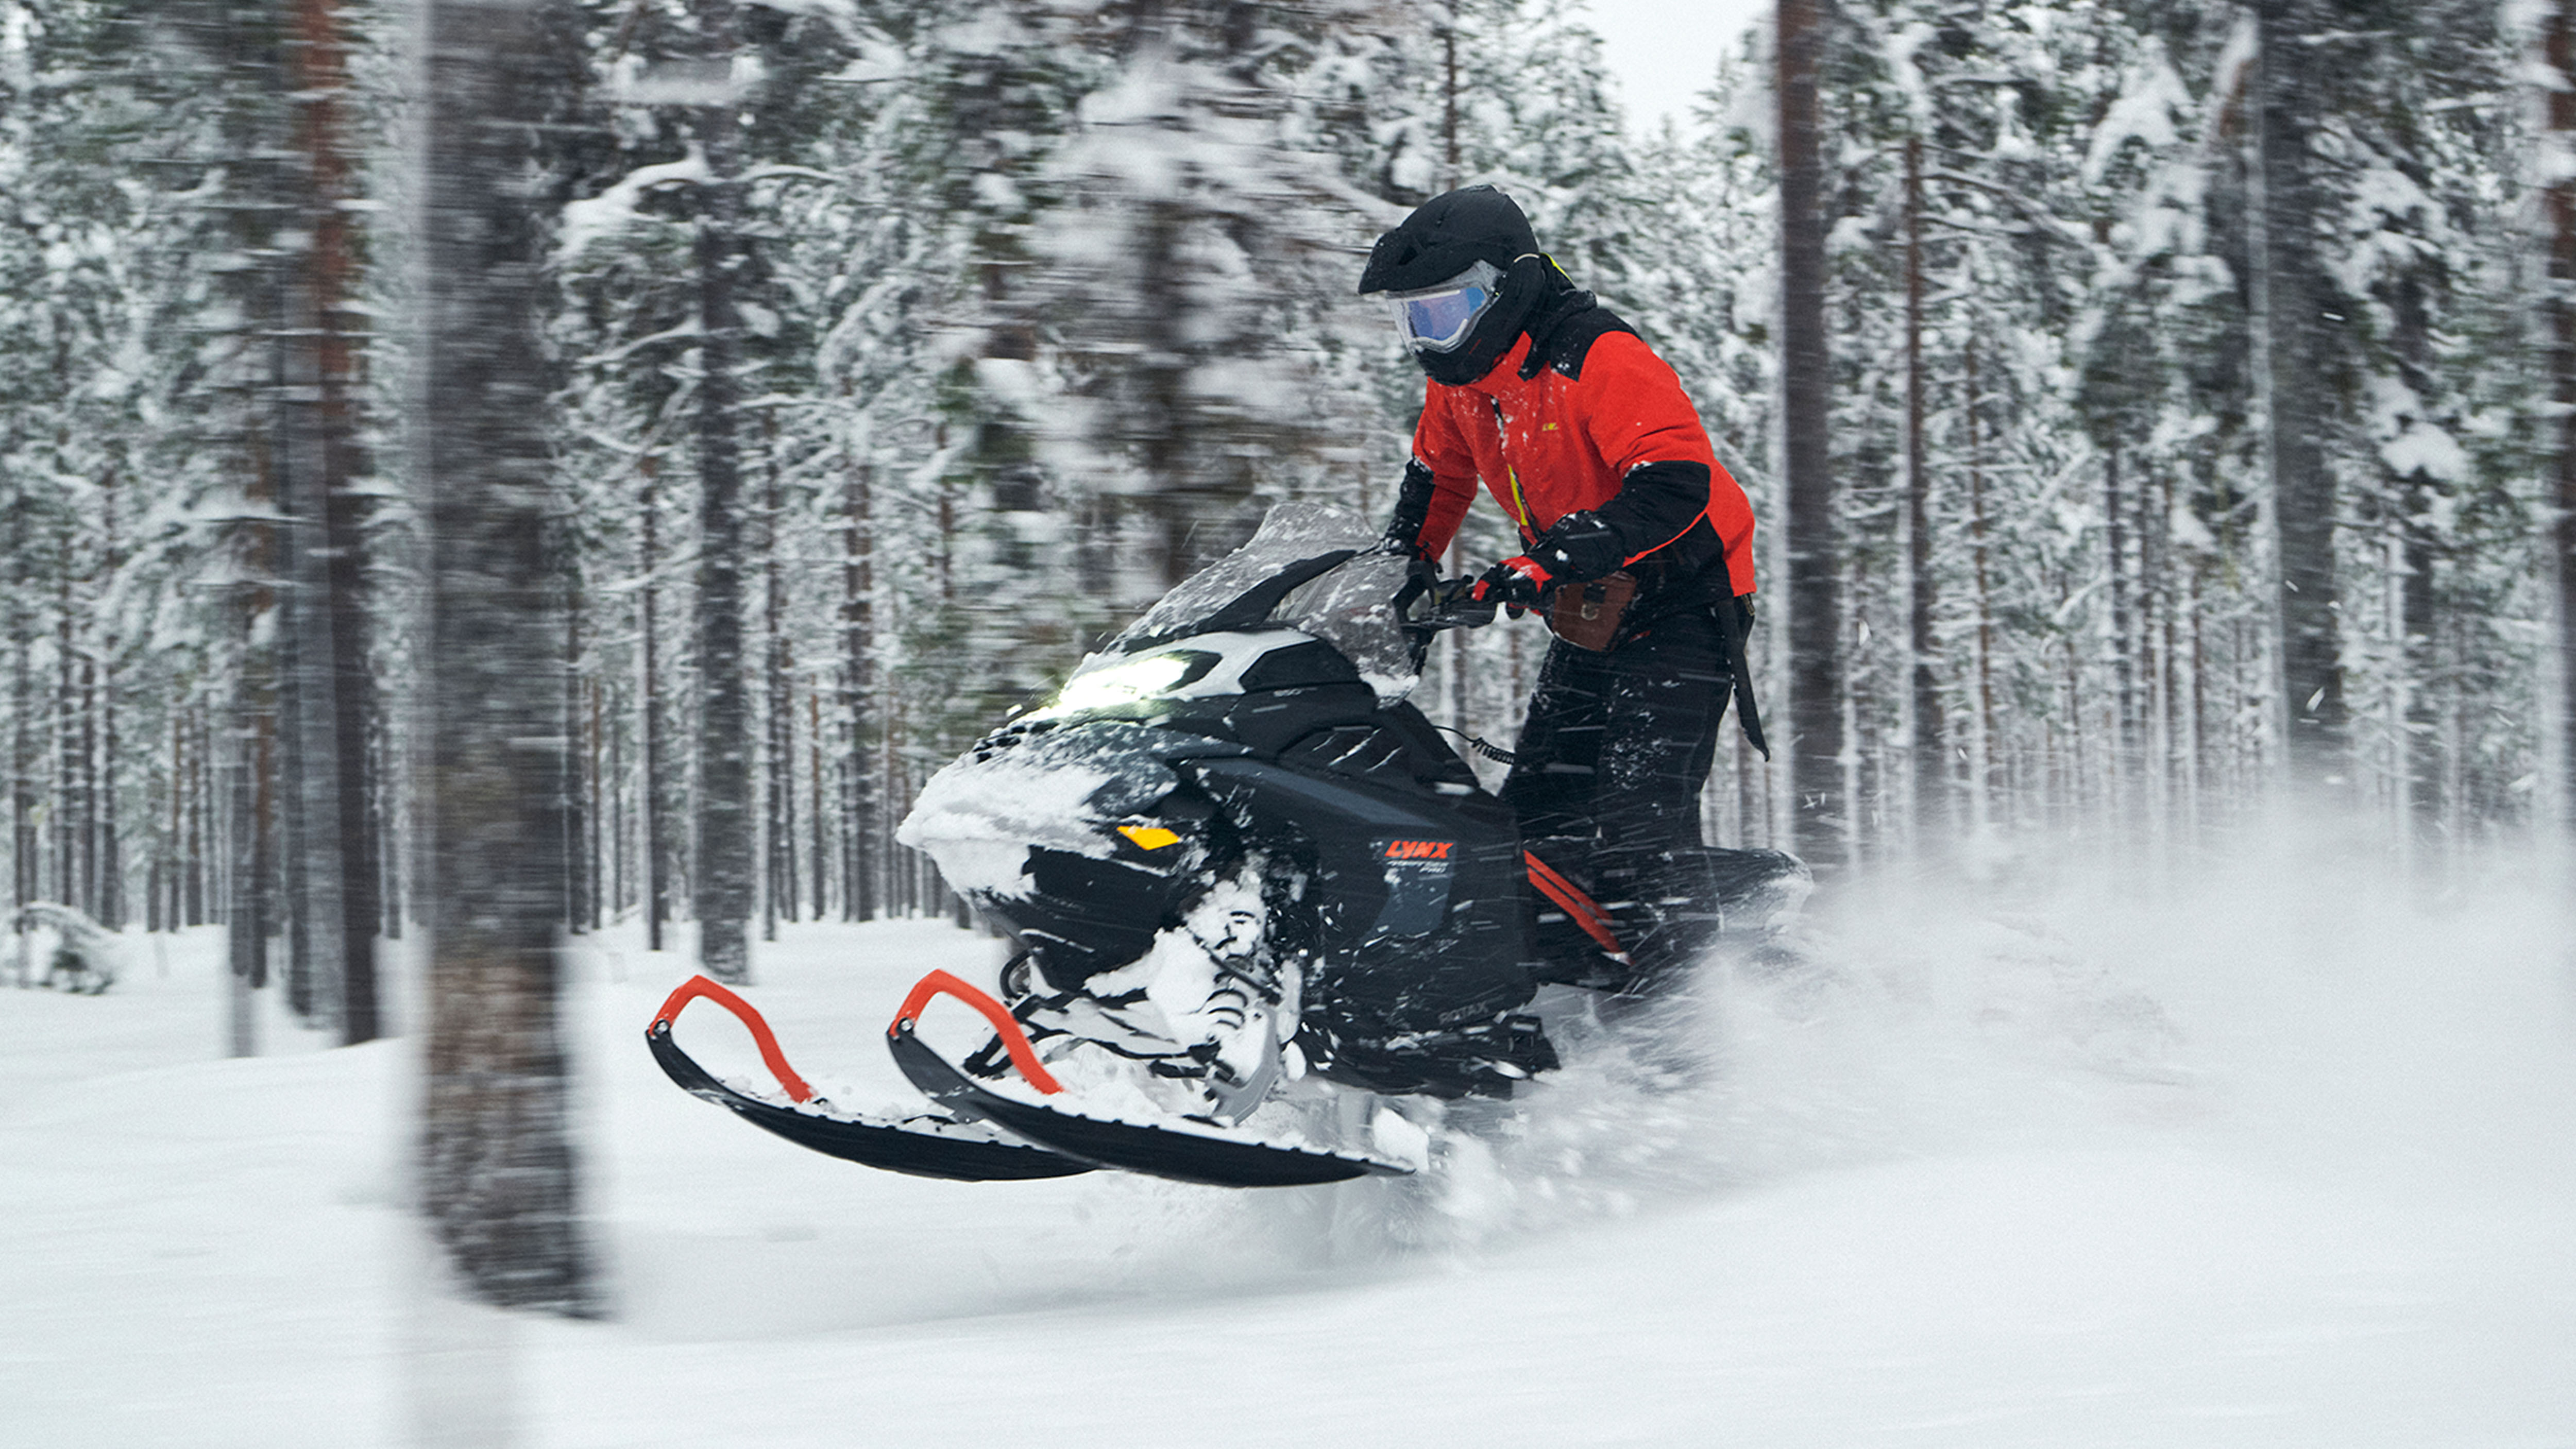 Lynx 49 Ranger PRO snowmobile riding in snowy forest